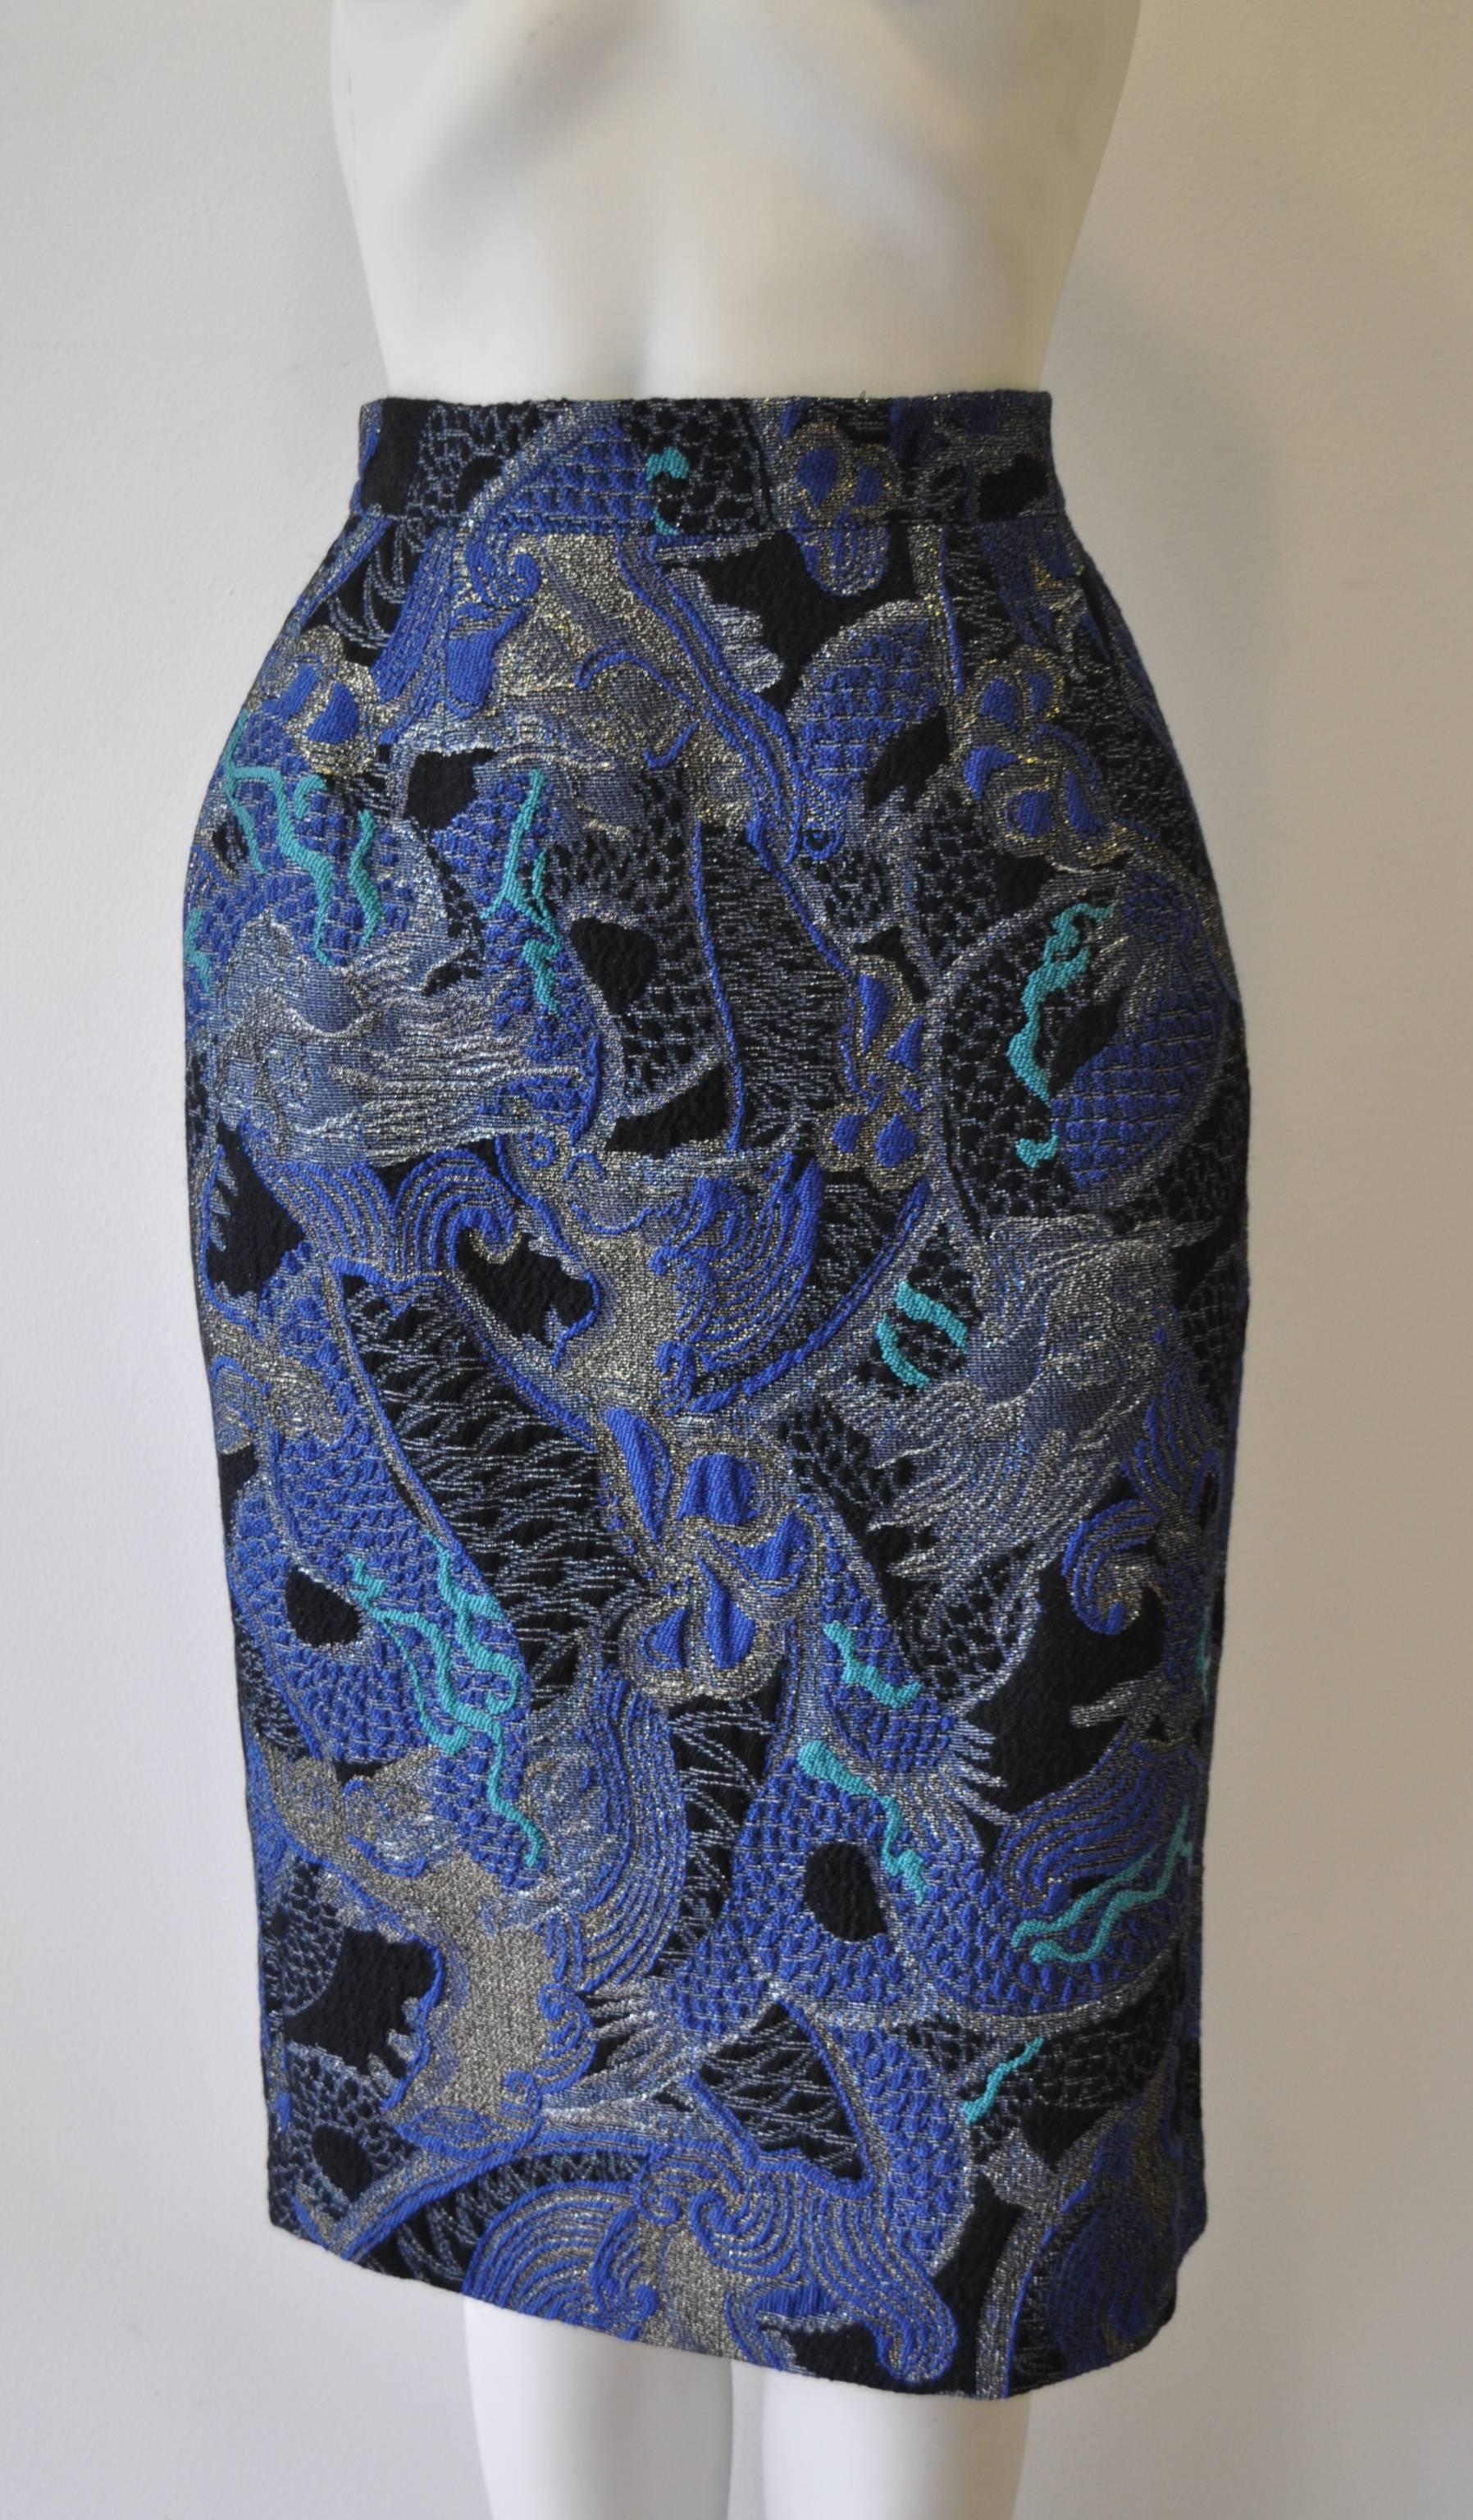 Gianfranco Ferre Plunging Neckline Blue Hue Design Skirt Suit In New Condition For Sale In Athens, Agia Paraskevi